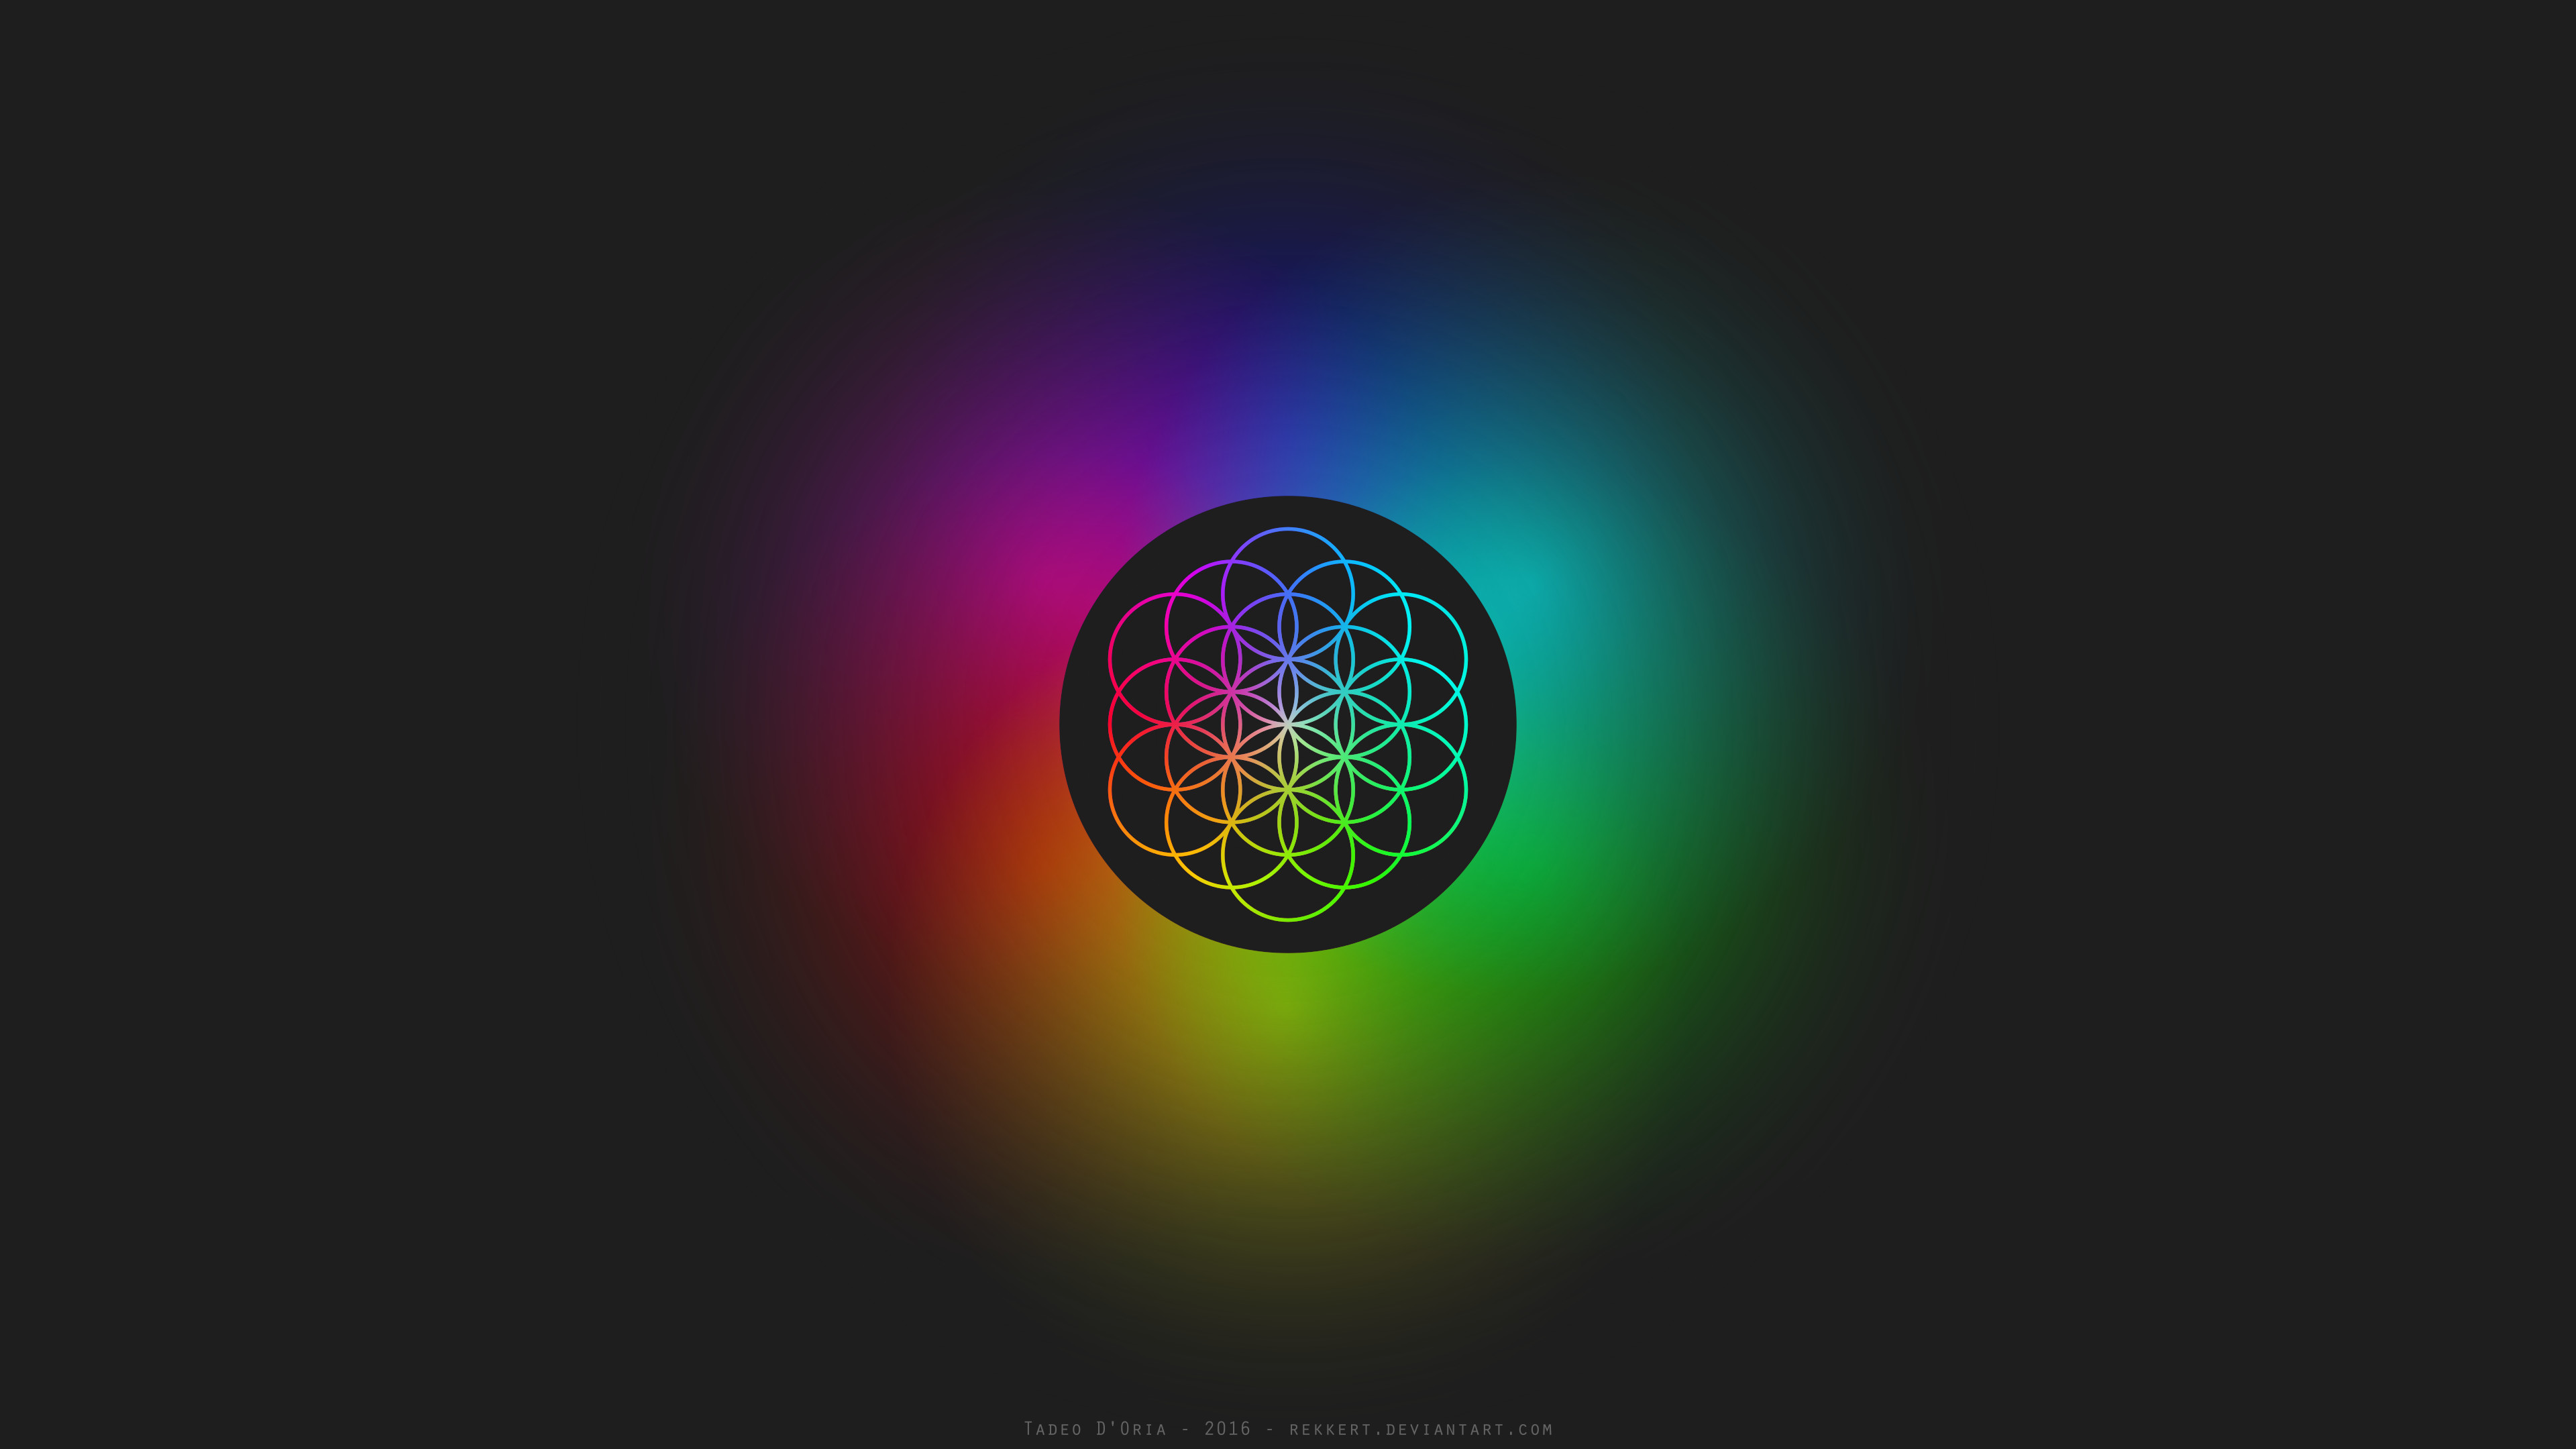 Coldplay iPhone wallpaper Coldplay Pinterest iPhone HD Wallpapers Pinterest Coldplay wallpaper, Hd wallpaper and Wallpaper